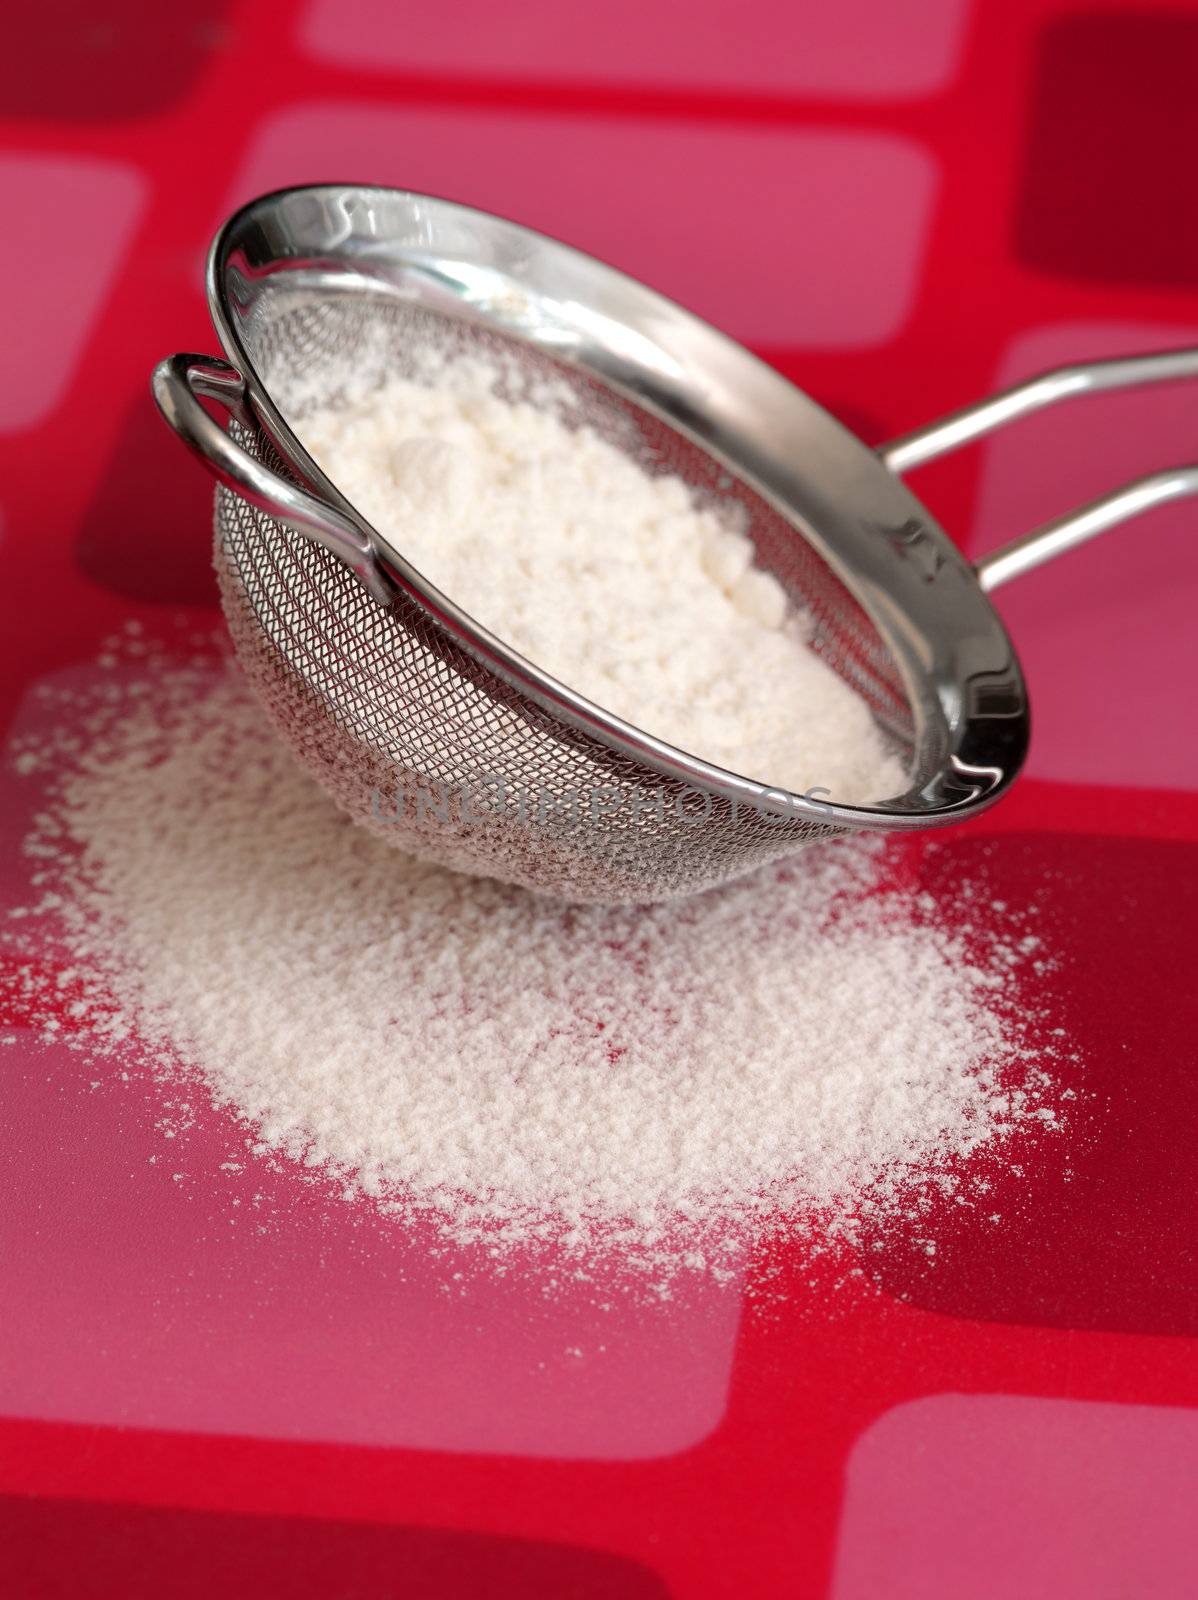 Macro photo of a sifter and flour on a pink retro countertop.